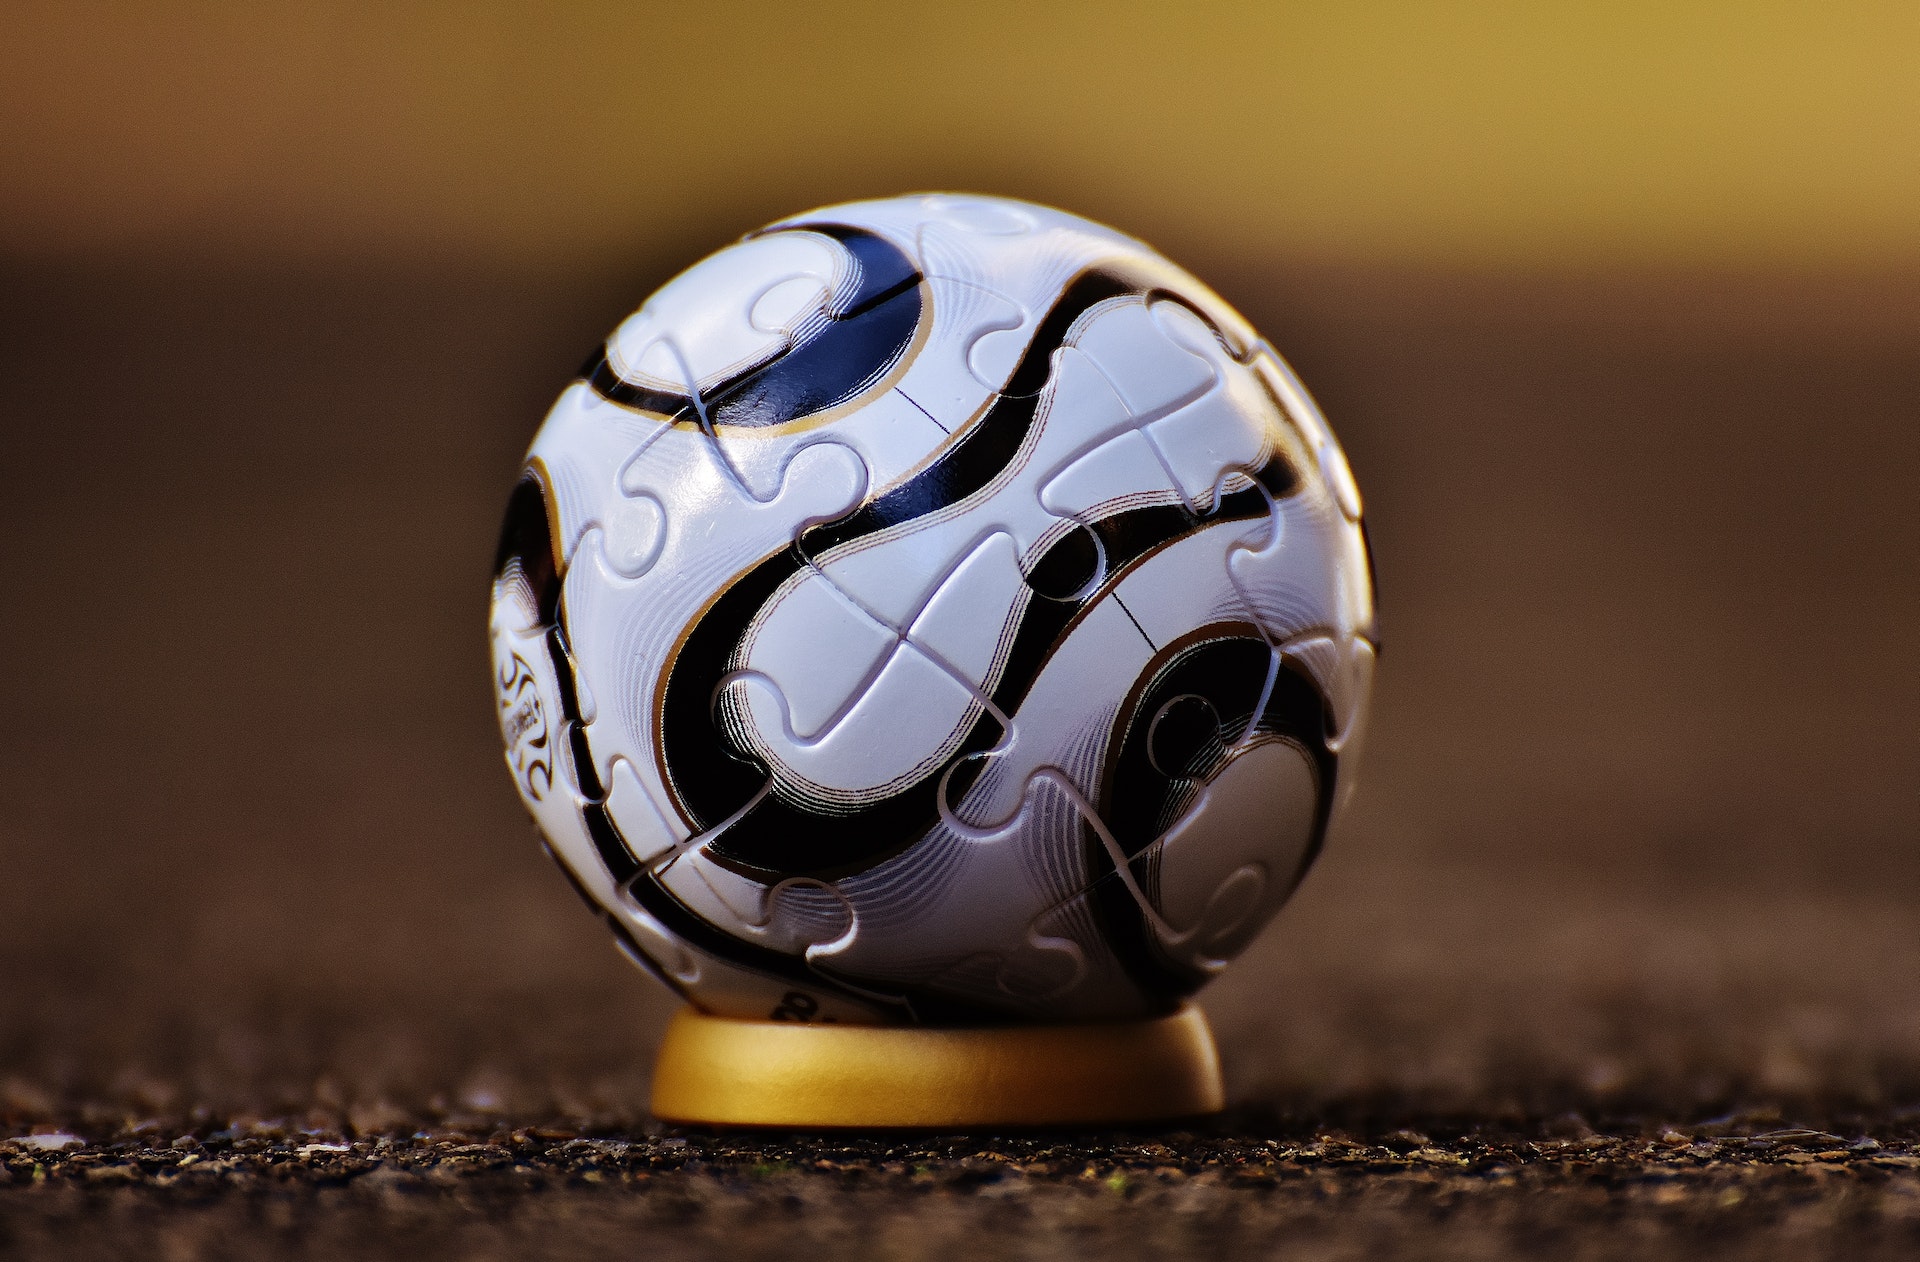 A soccer ball on a stand. Photo by: Pexels.com